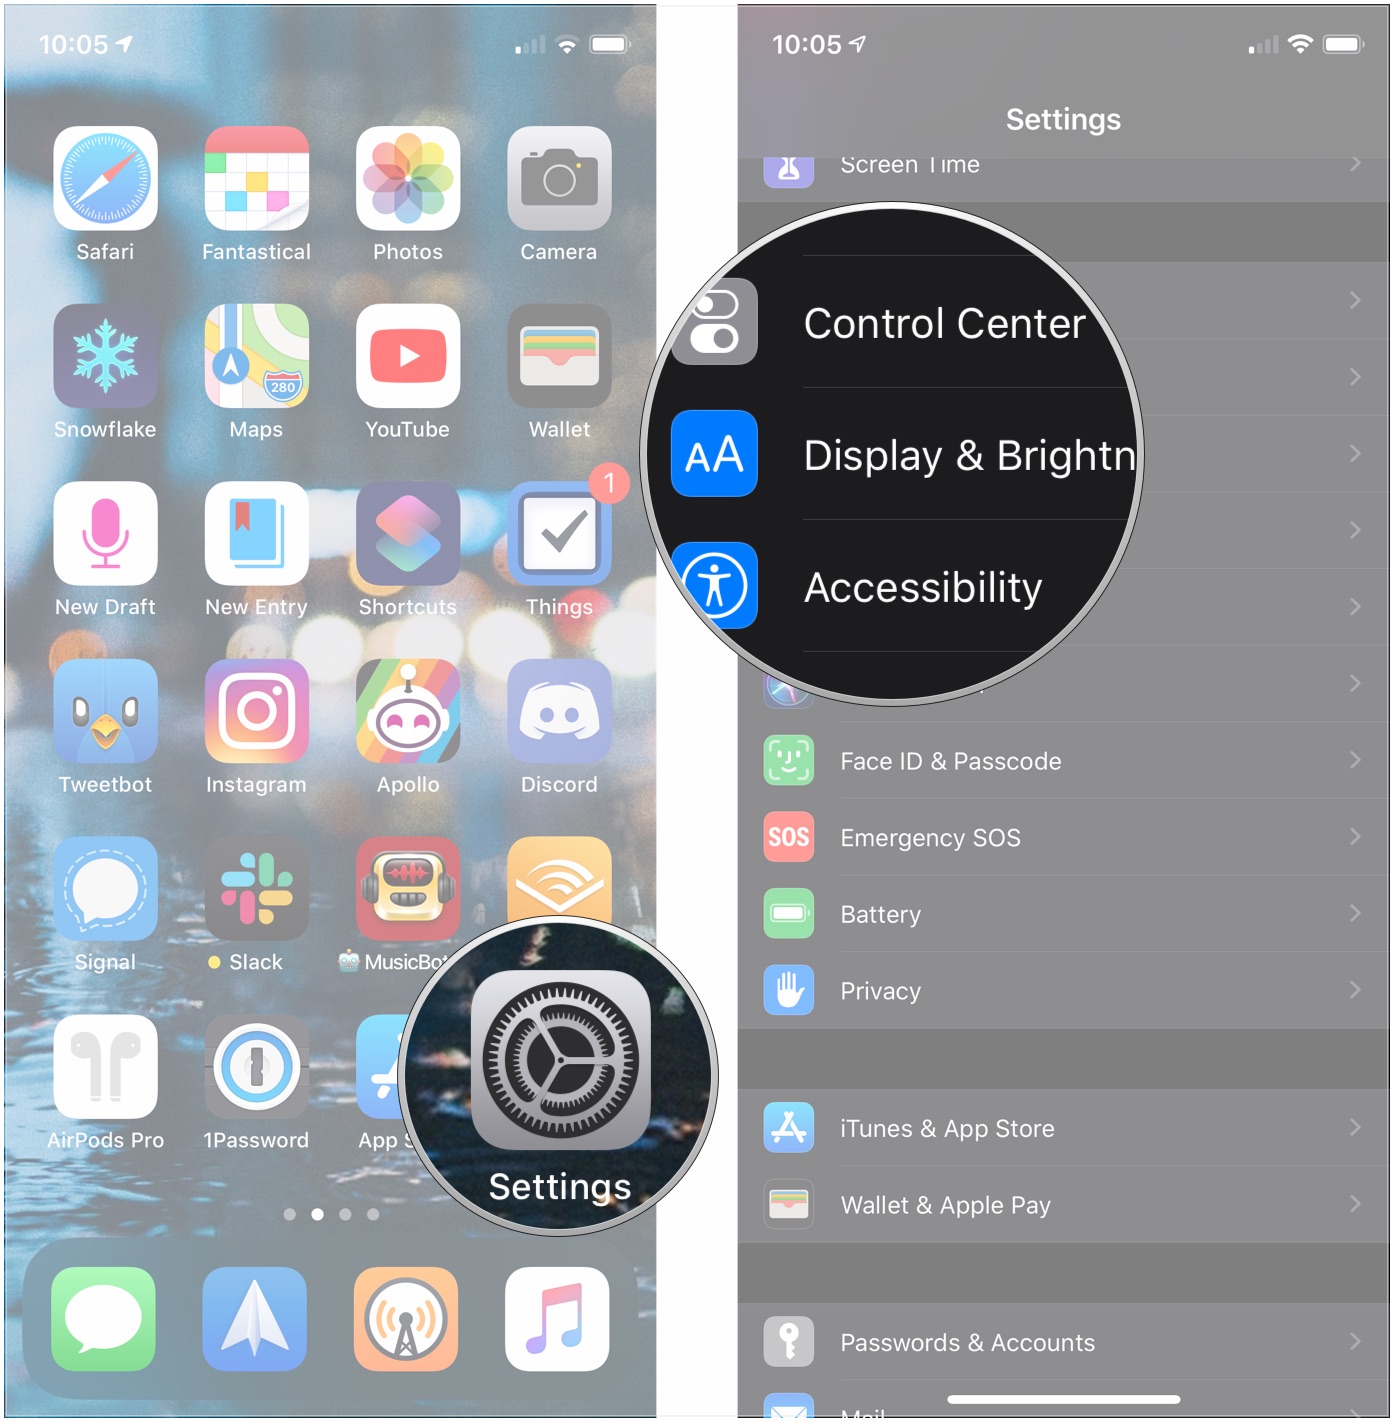 How to set Auto-Lock time: Open Settings, tap Display & Brightness